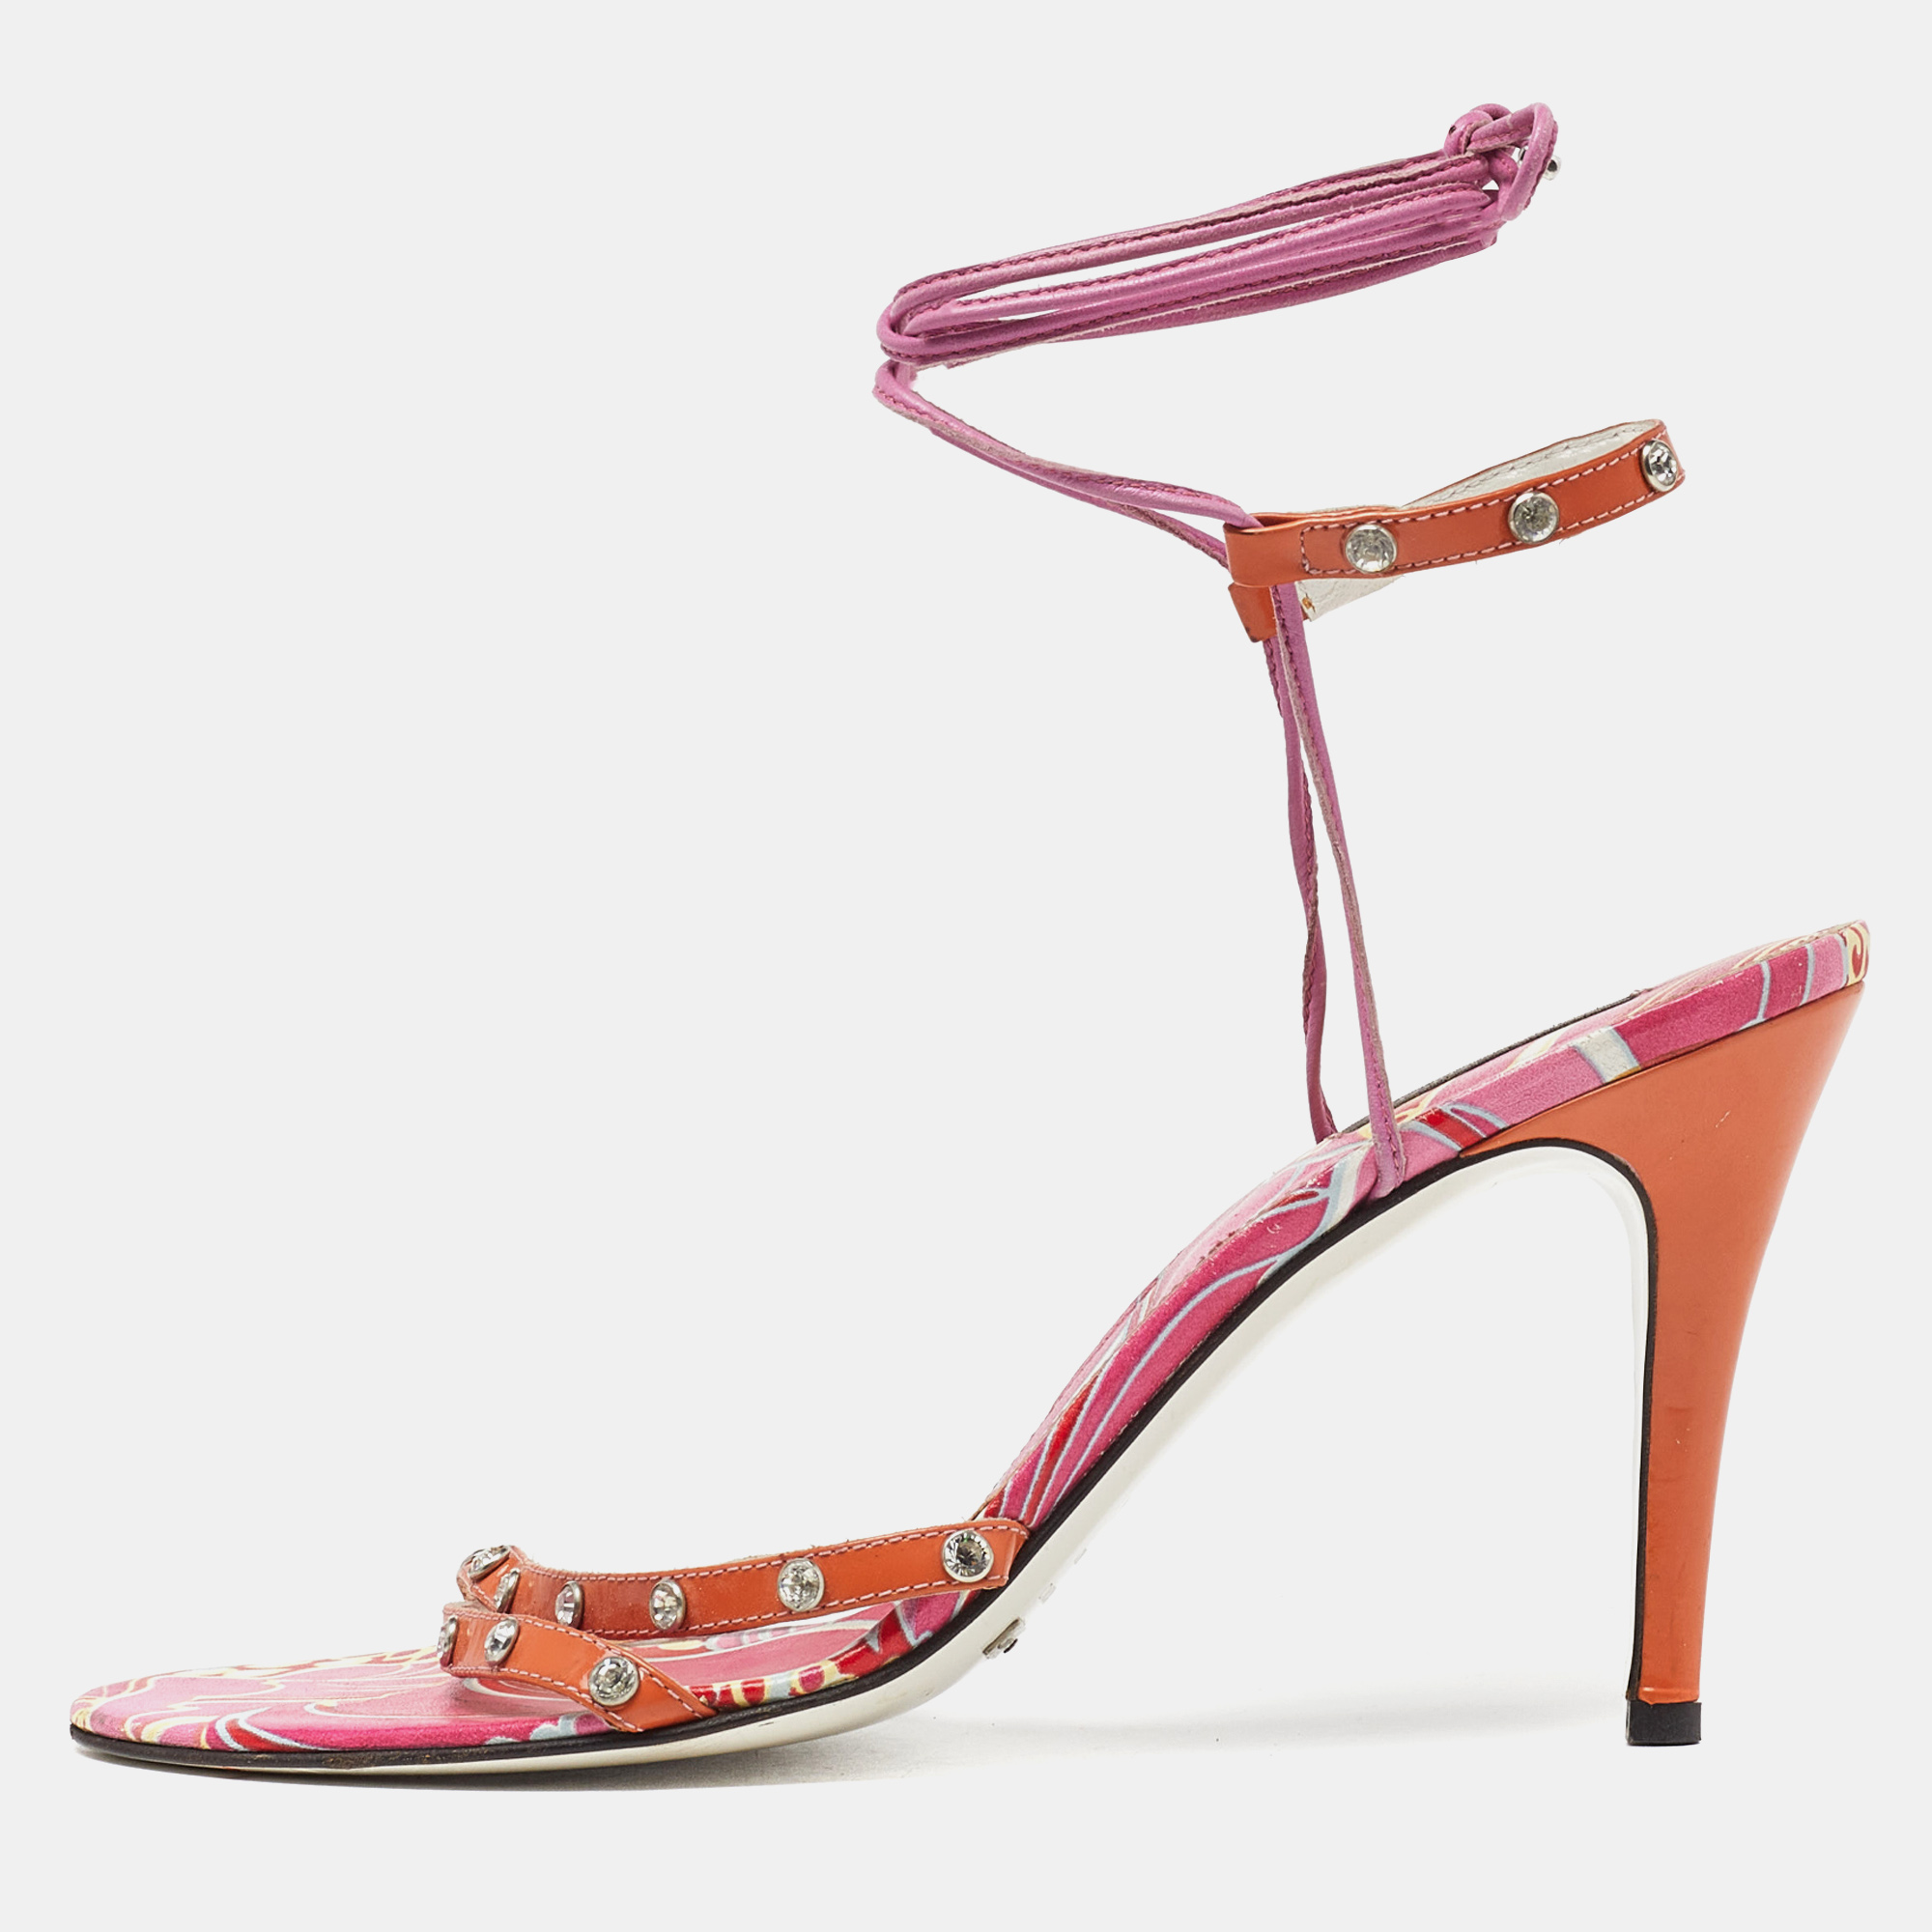 Pre-owned Dolce & Gabbana Multicolor Patent And Leather Ankle Tie Open Toe Sandals Size 40